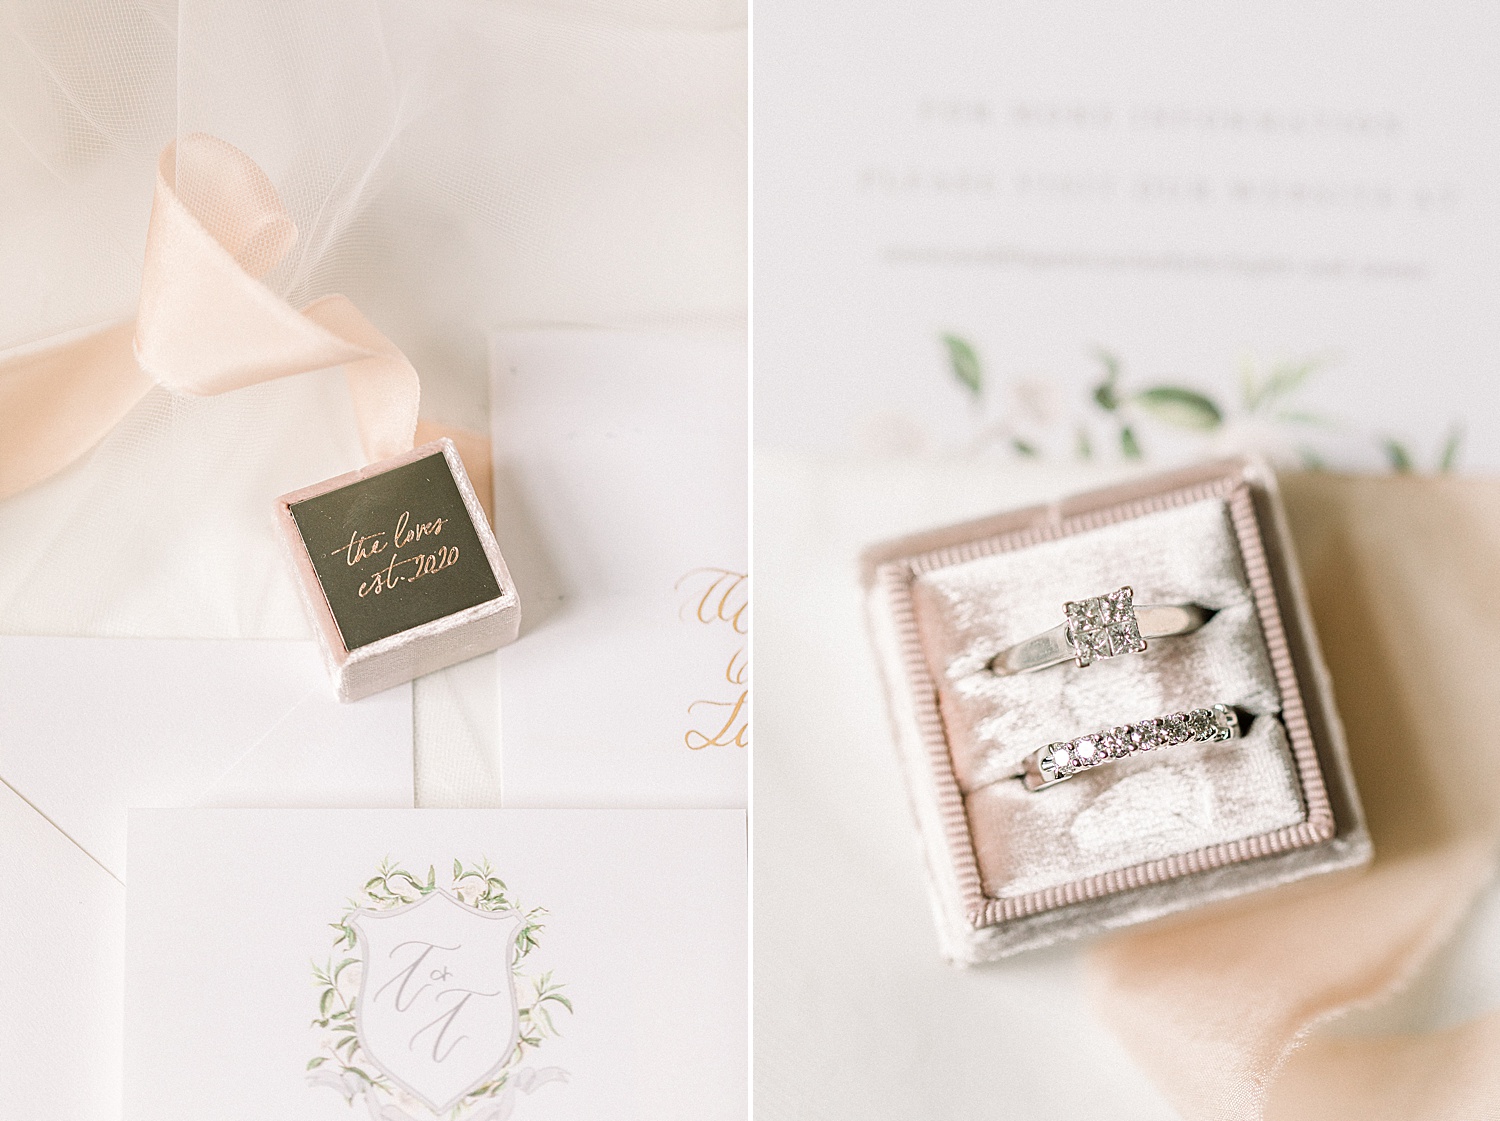 wedding details from The Sonnet House wedding in Alabama